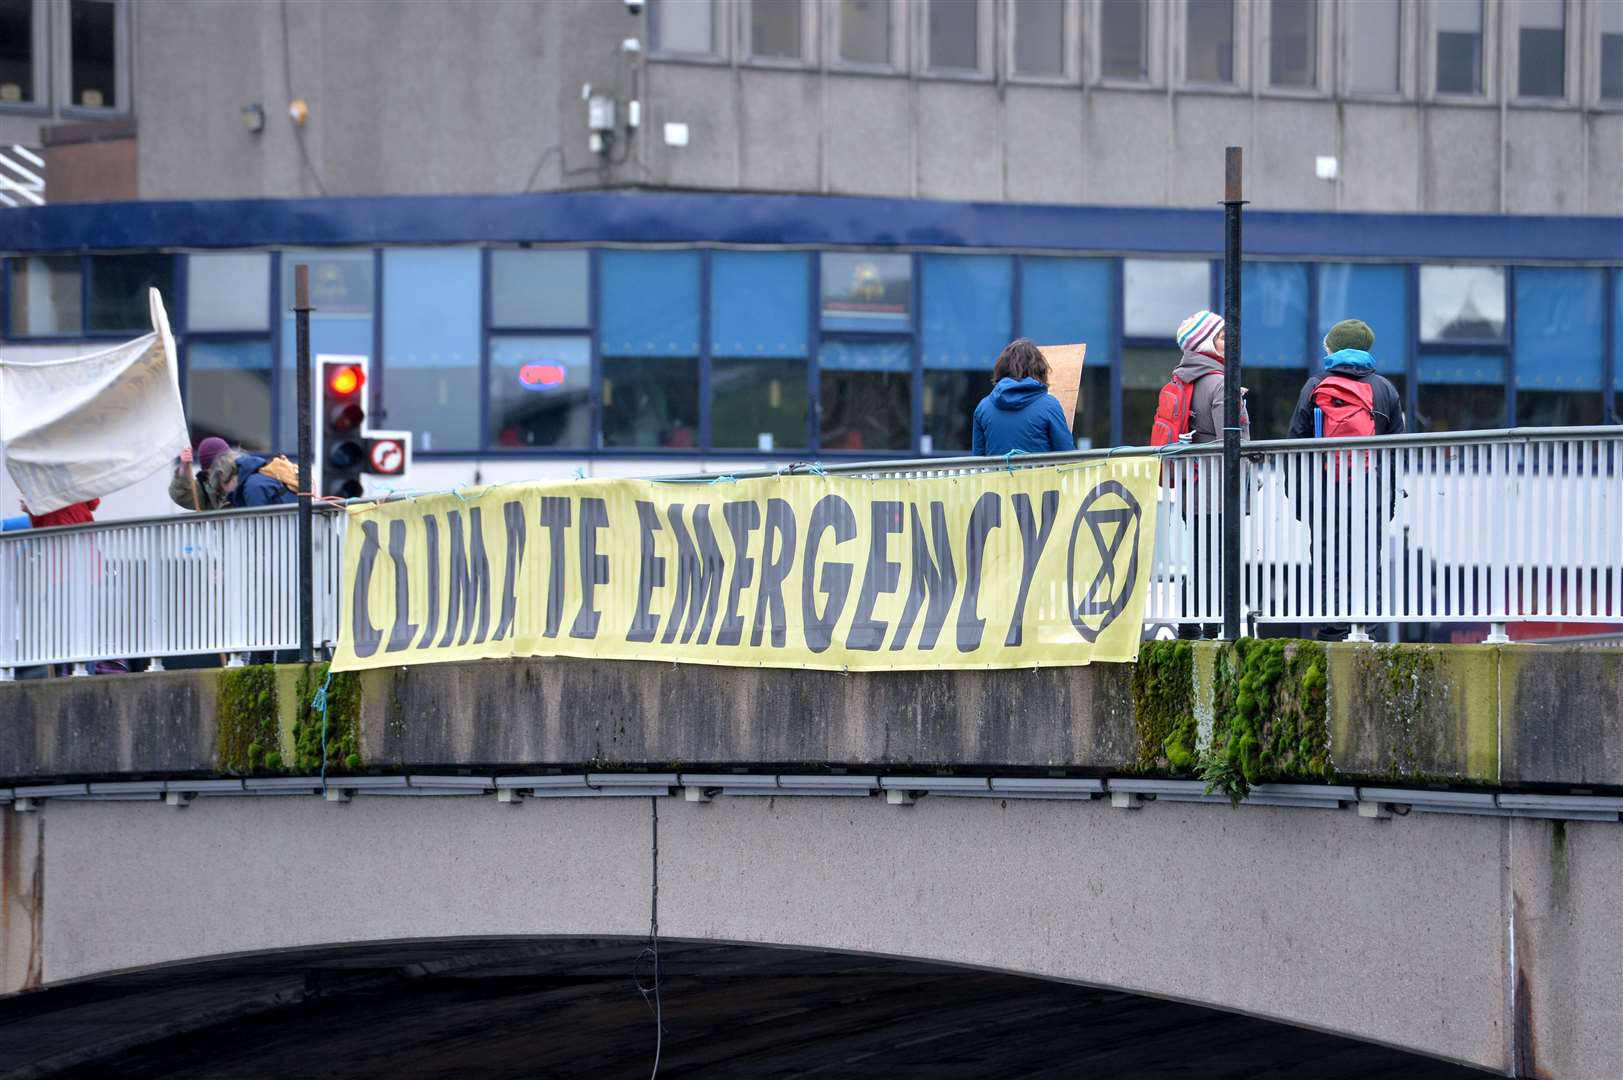 Climate Emergency Banners on Ness Bridge.